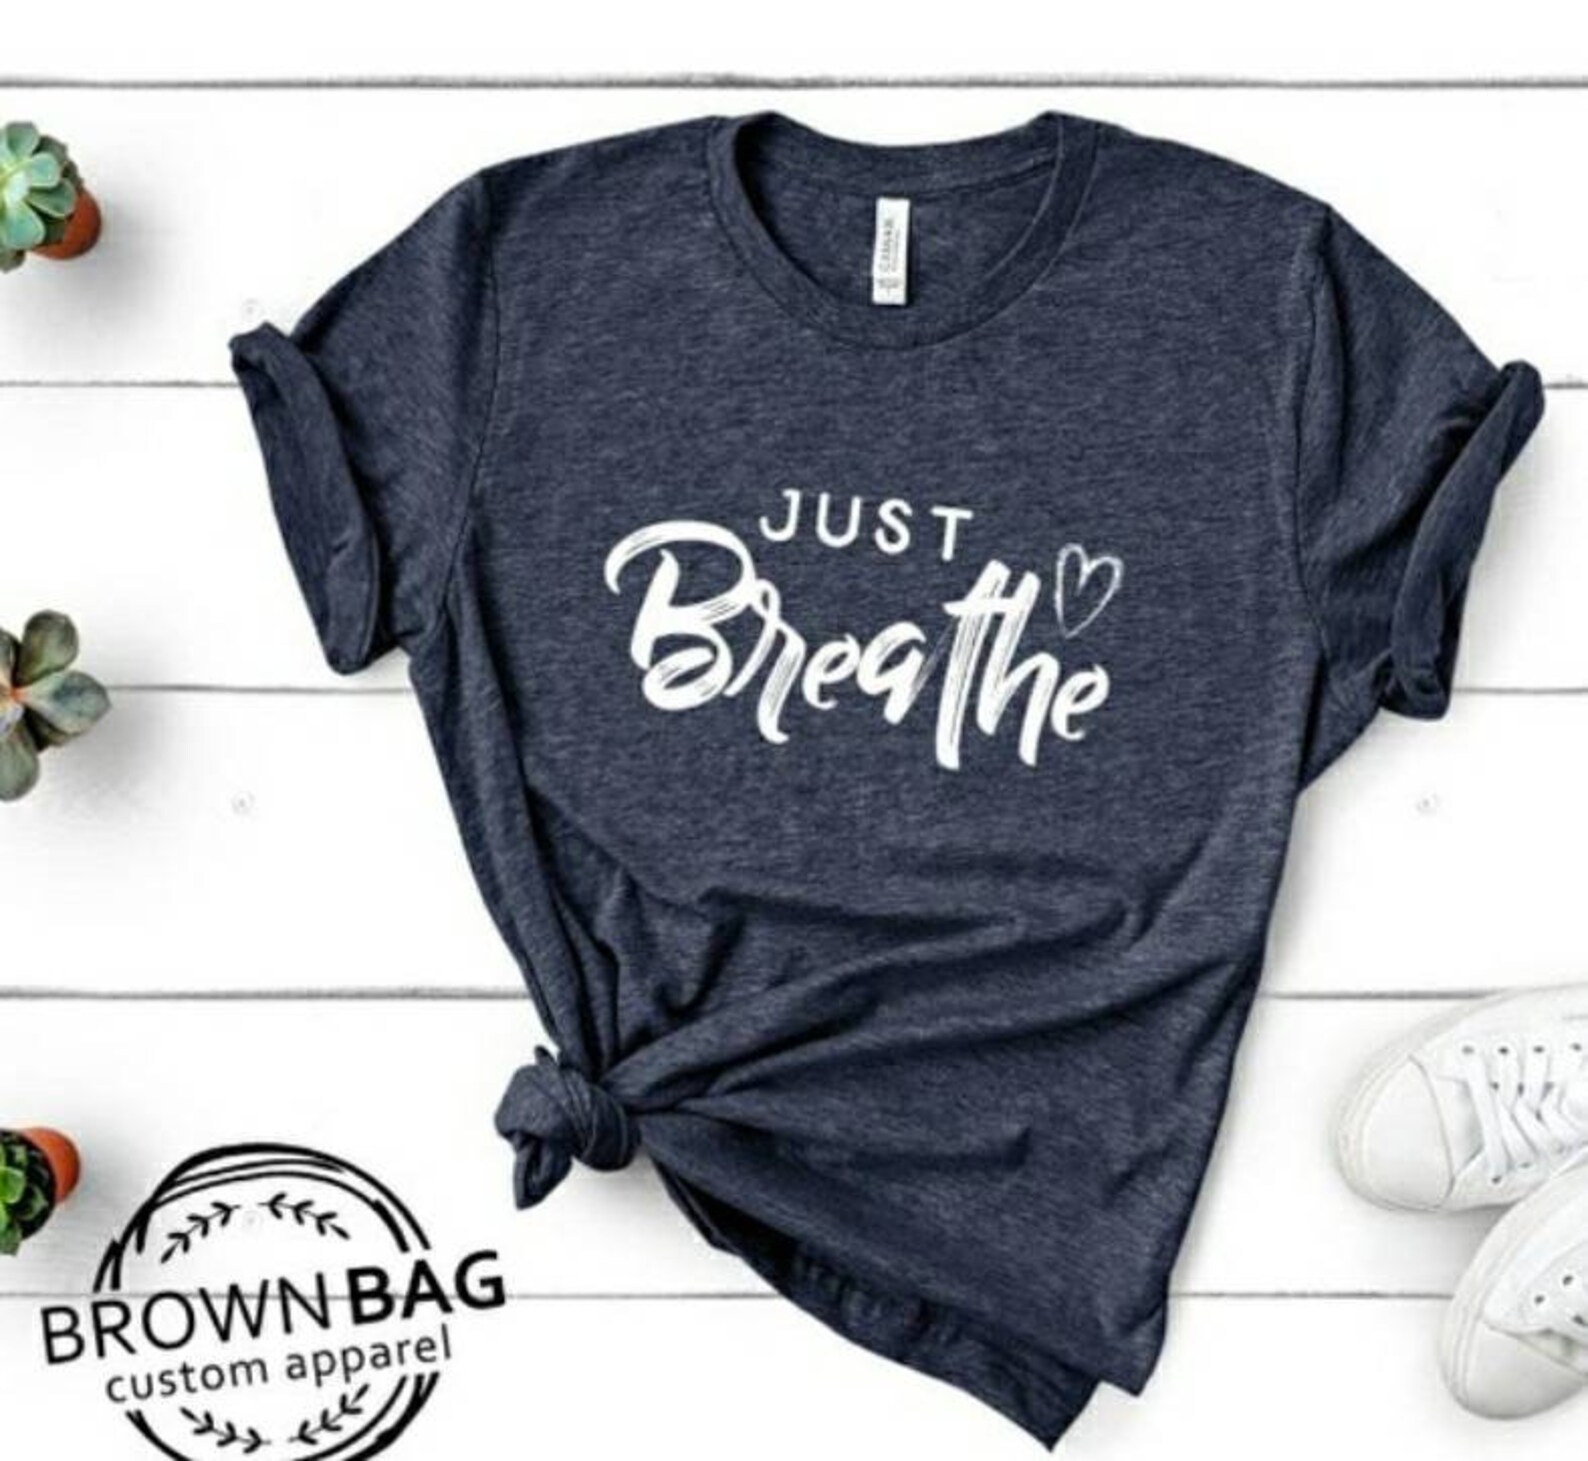 Just breath tee shirt iron on transfer DTF transfers | Etsy